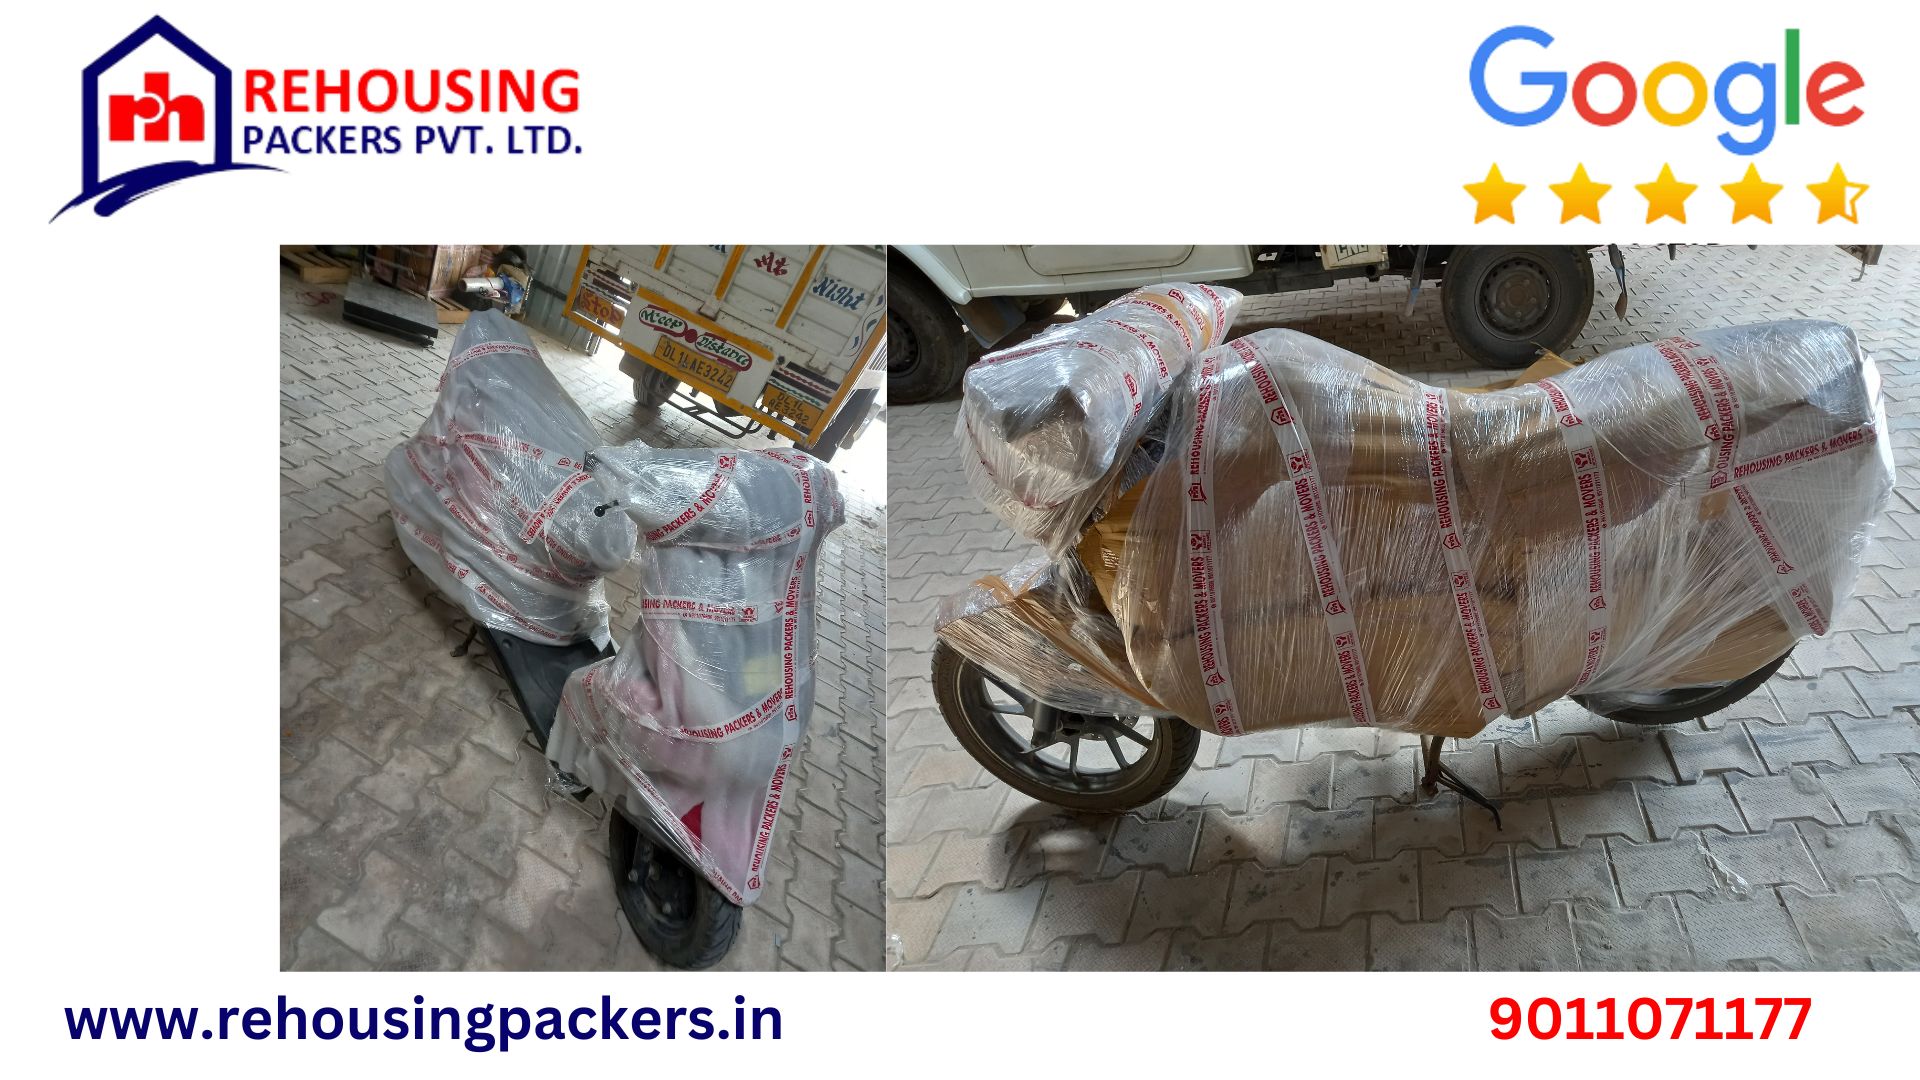 Packers and Movers from Delhi to Chennai